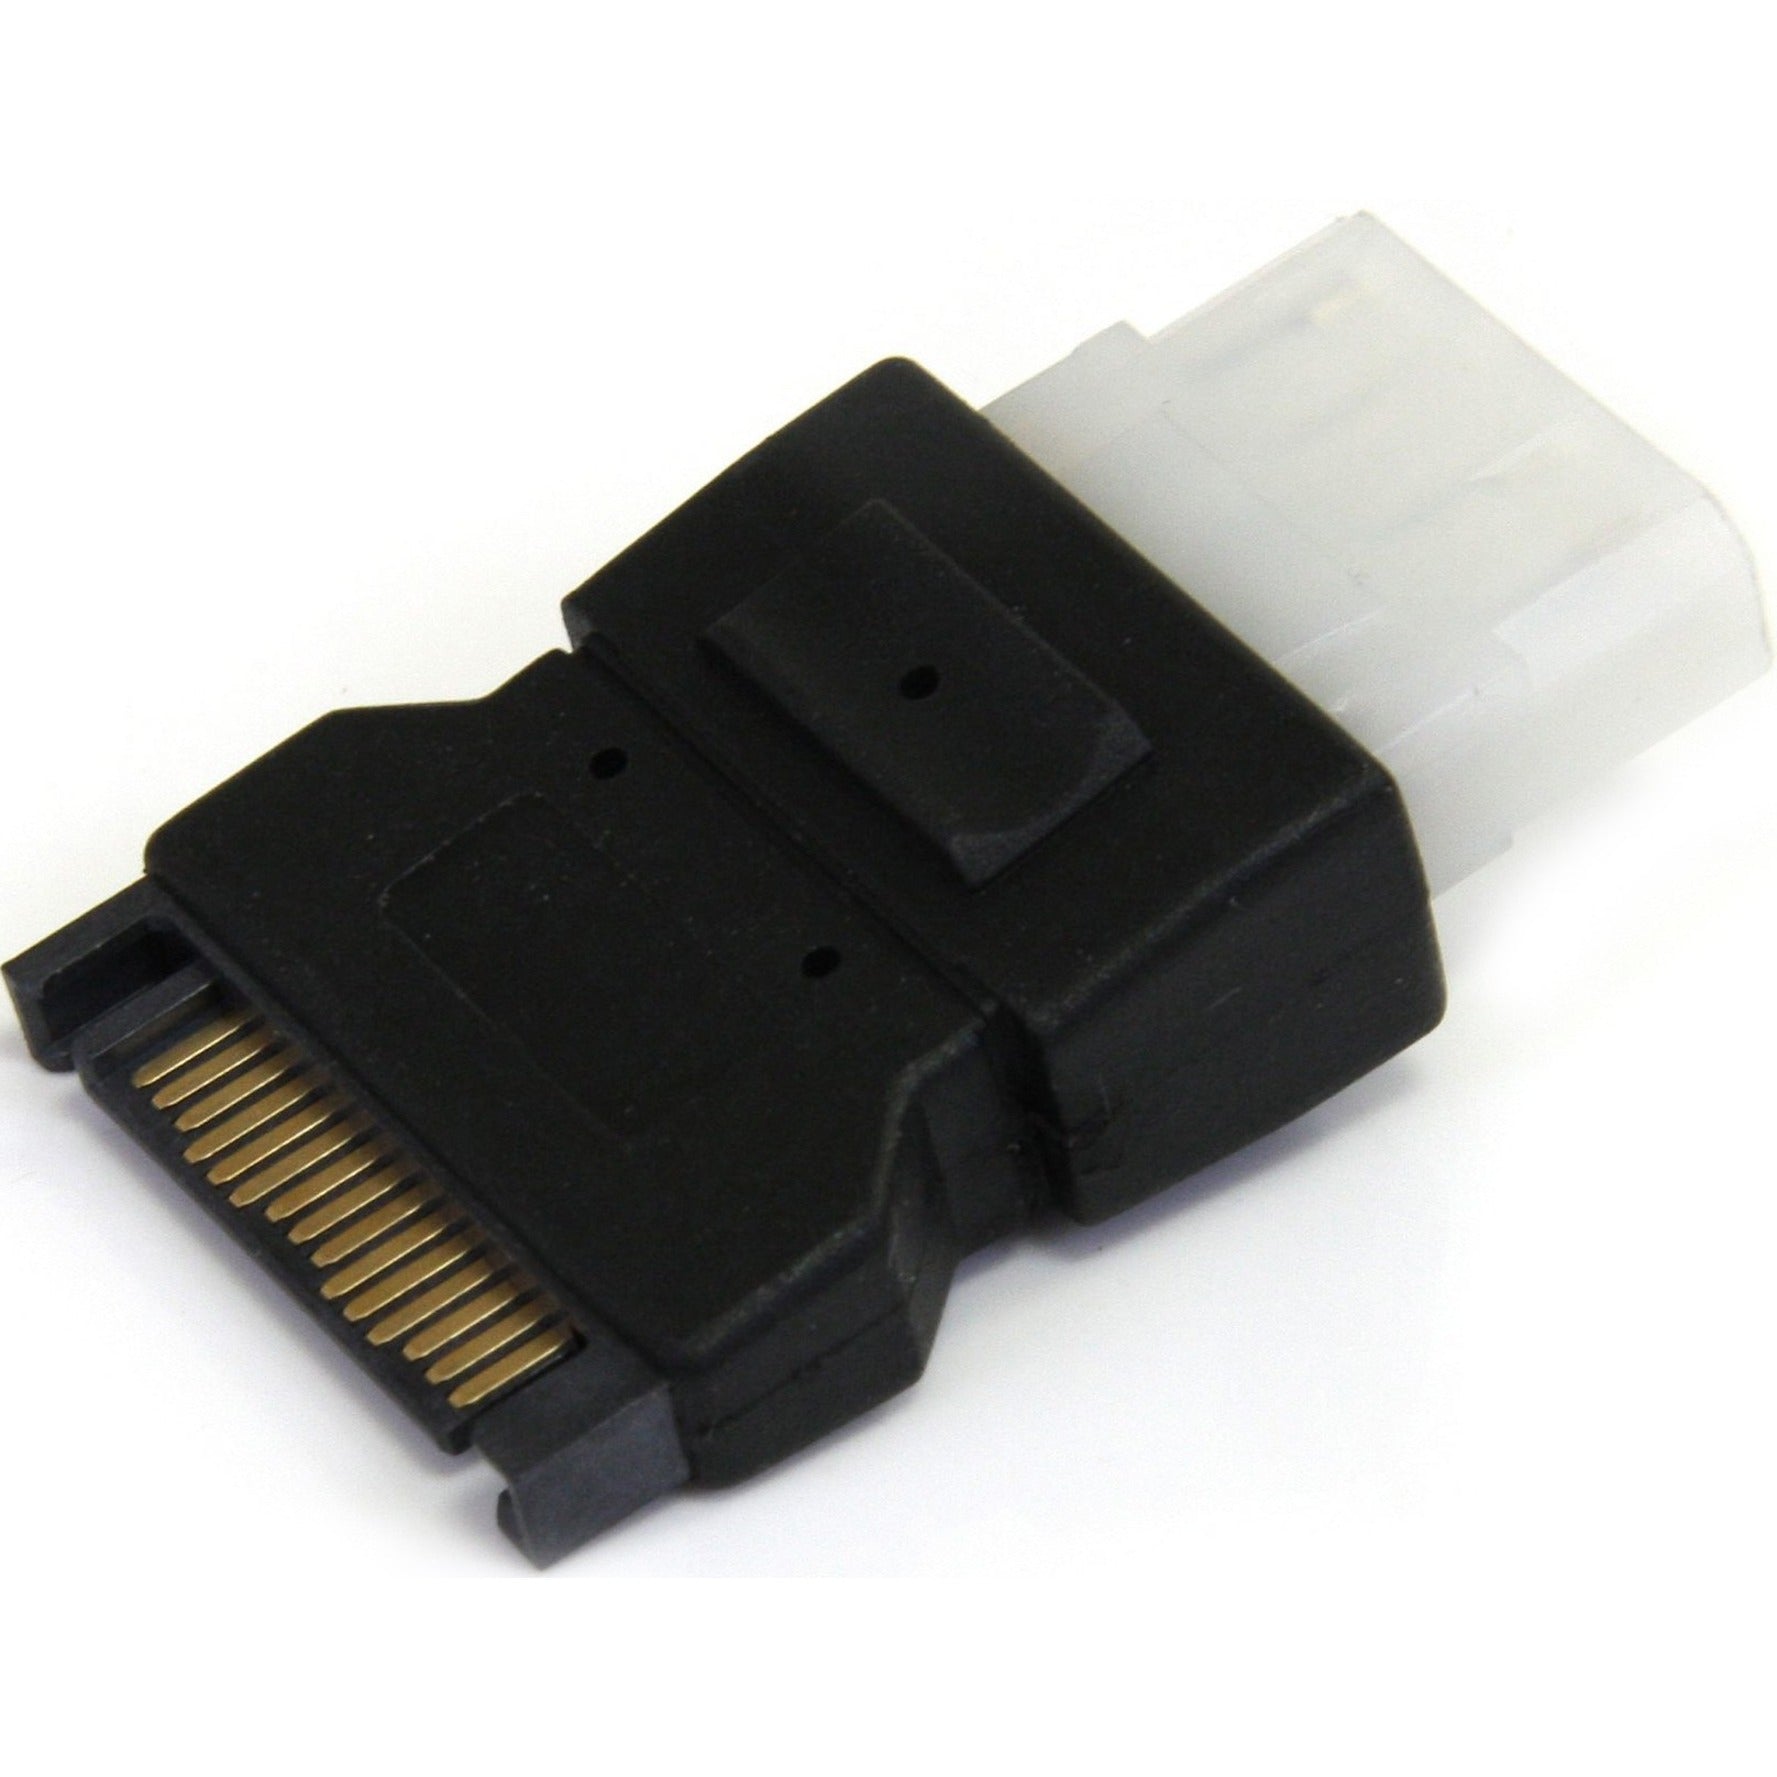 StarTech.com LP4SATAFM Power Cable Adapter, SATA to LP4 Power Connector Adapter